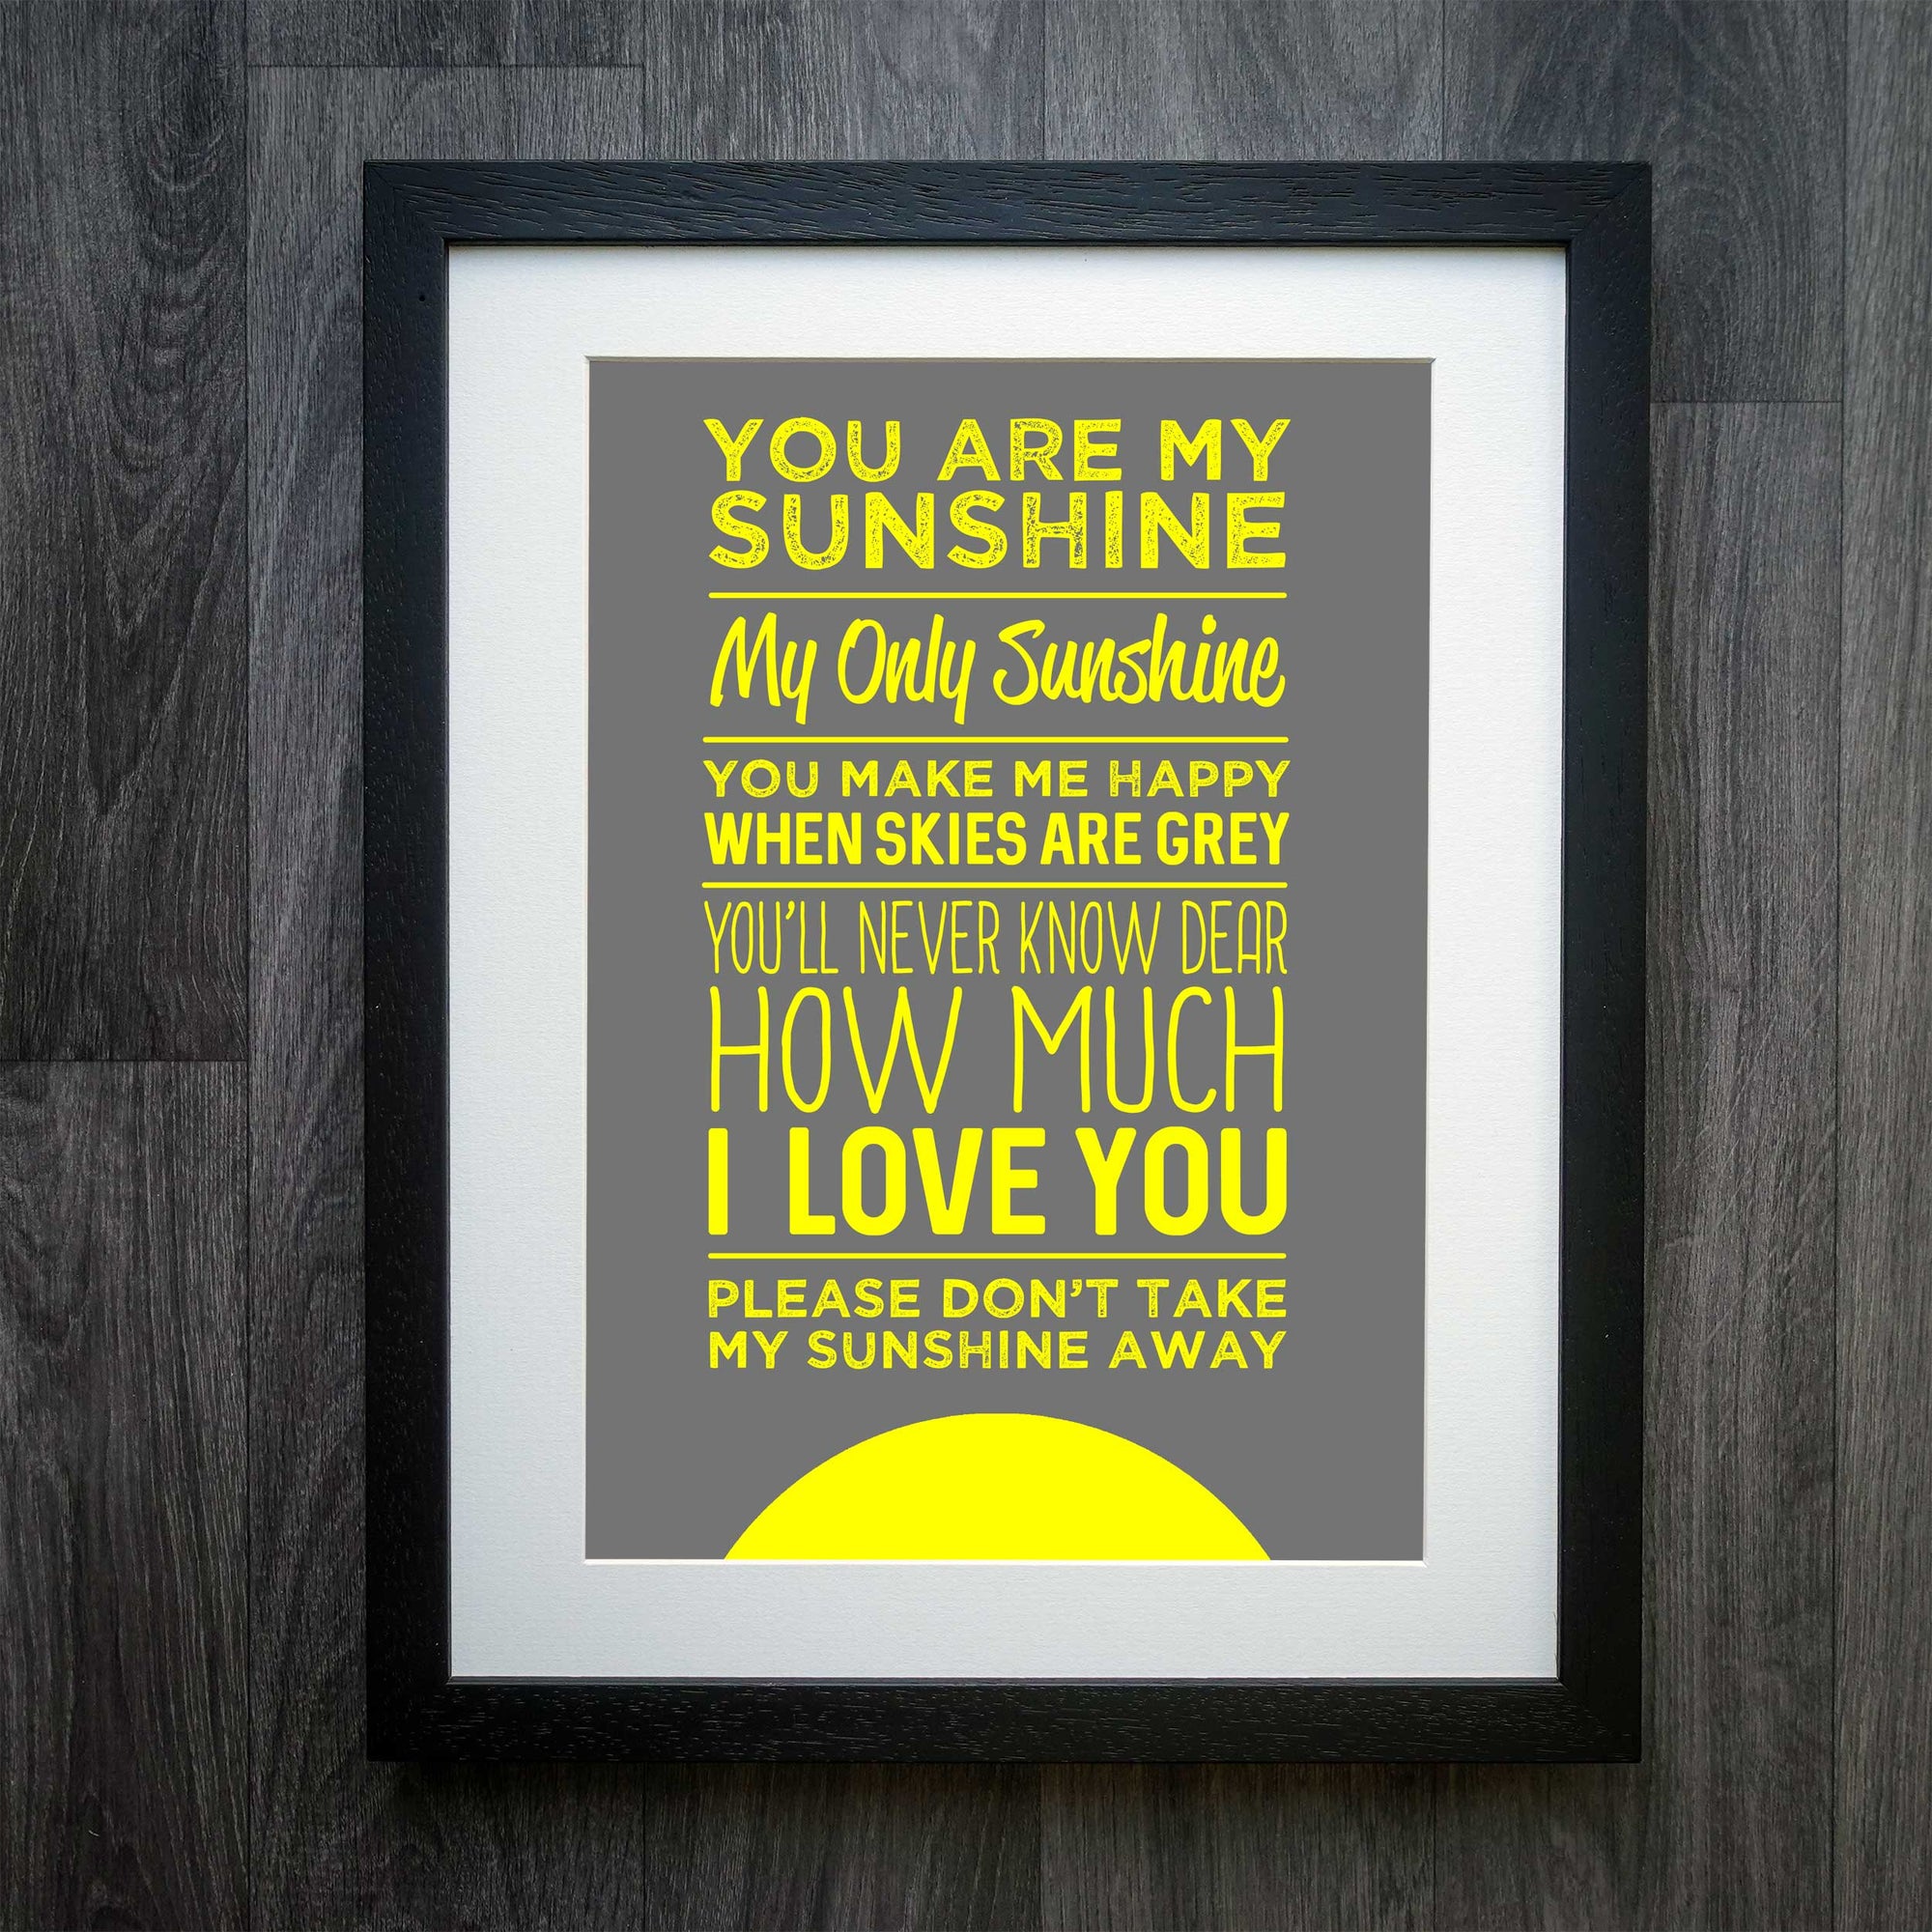 You Are My Sunshine Lyrics Print: A Timeless Melody Captured in Art